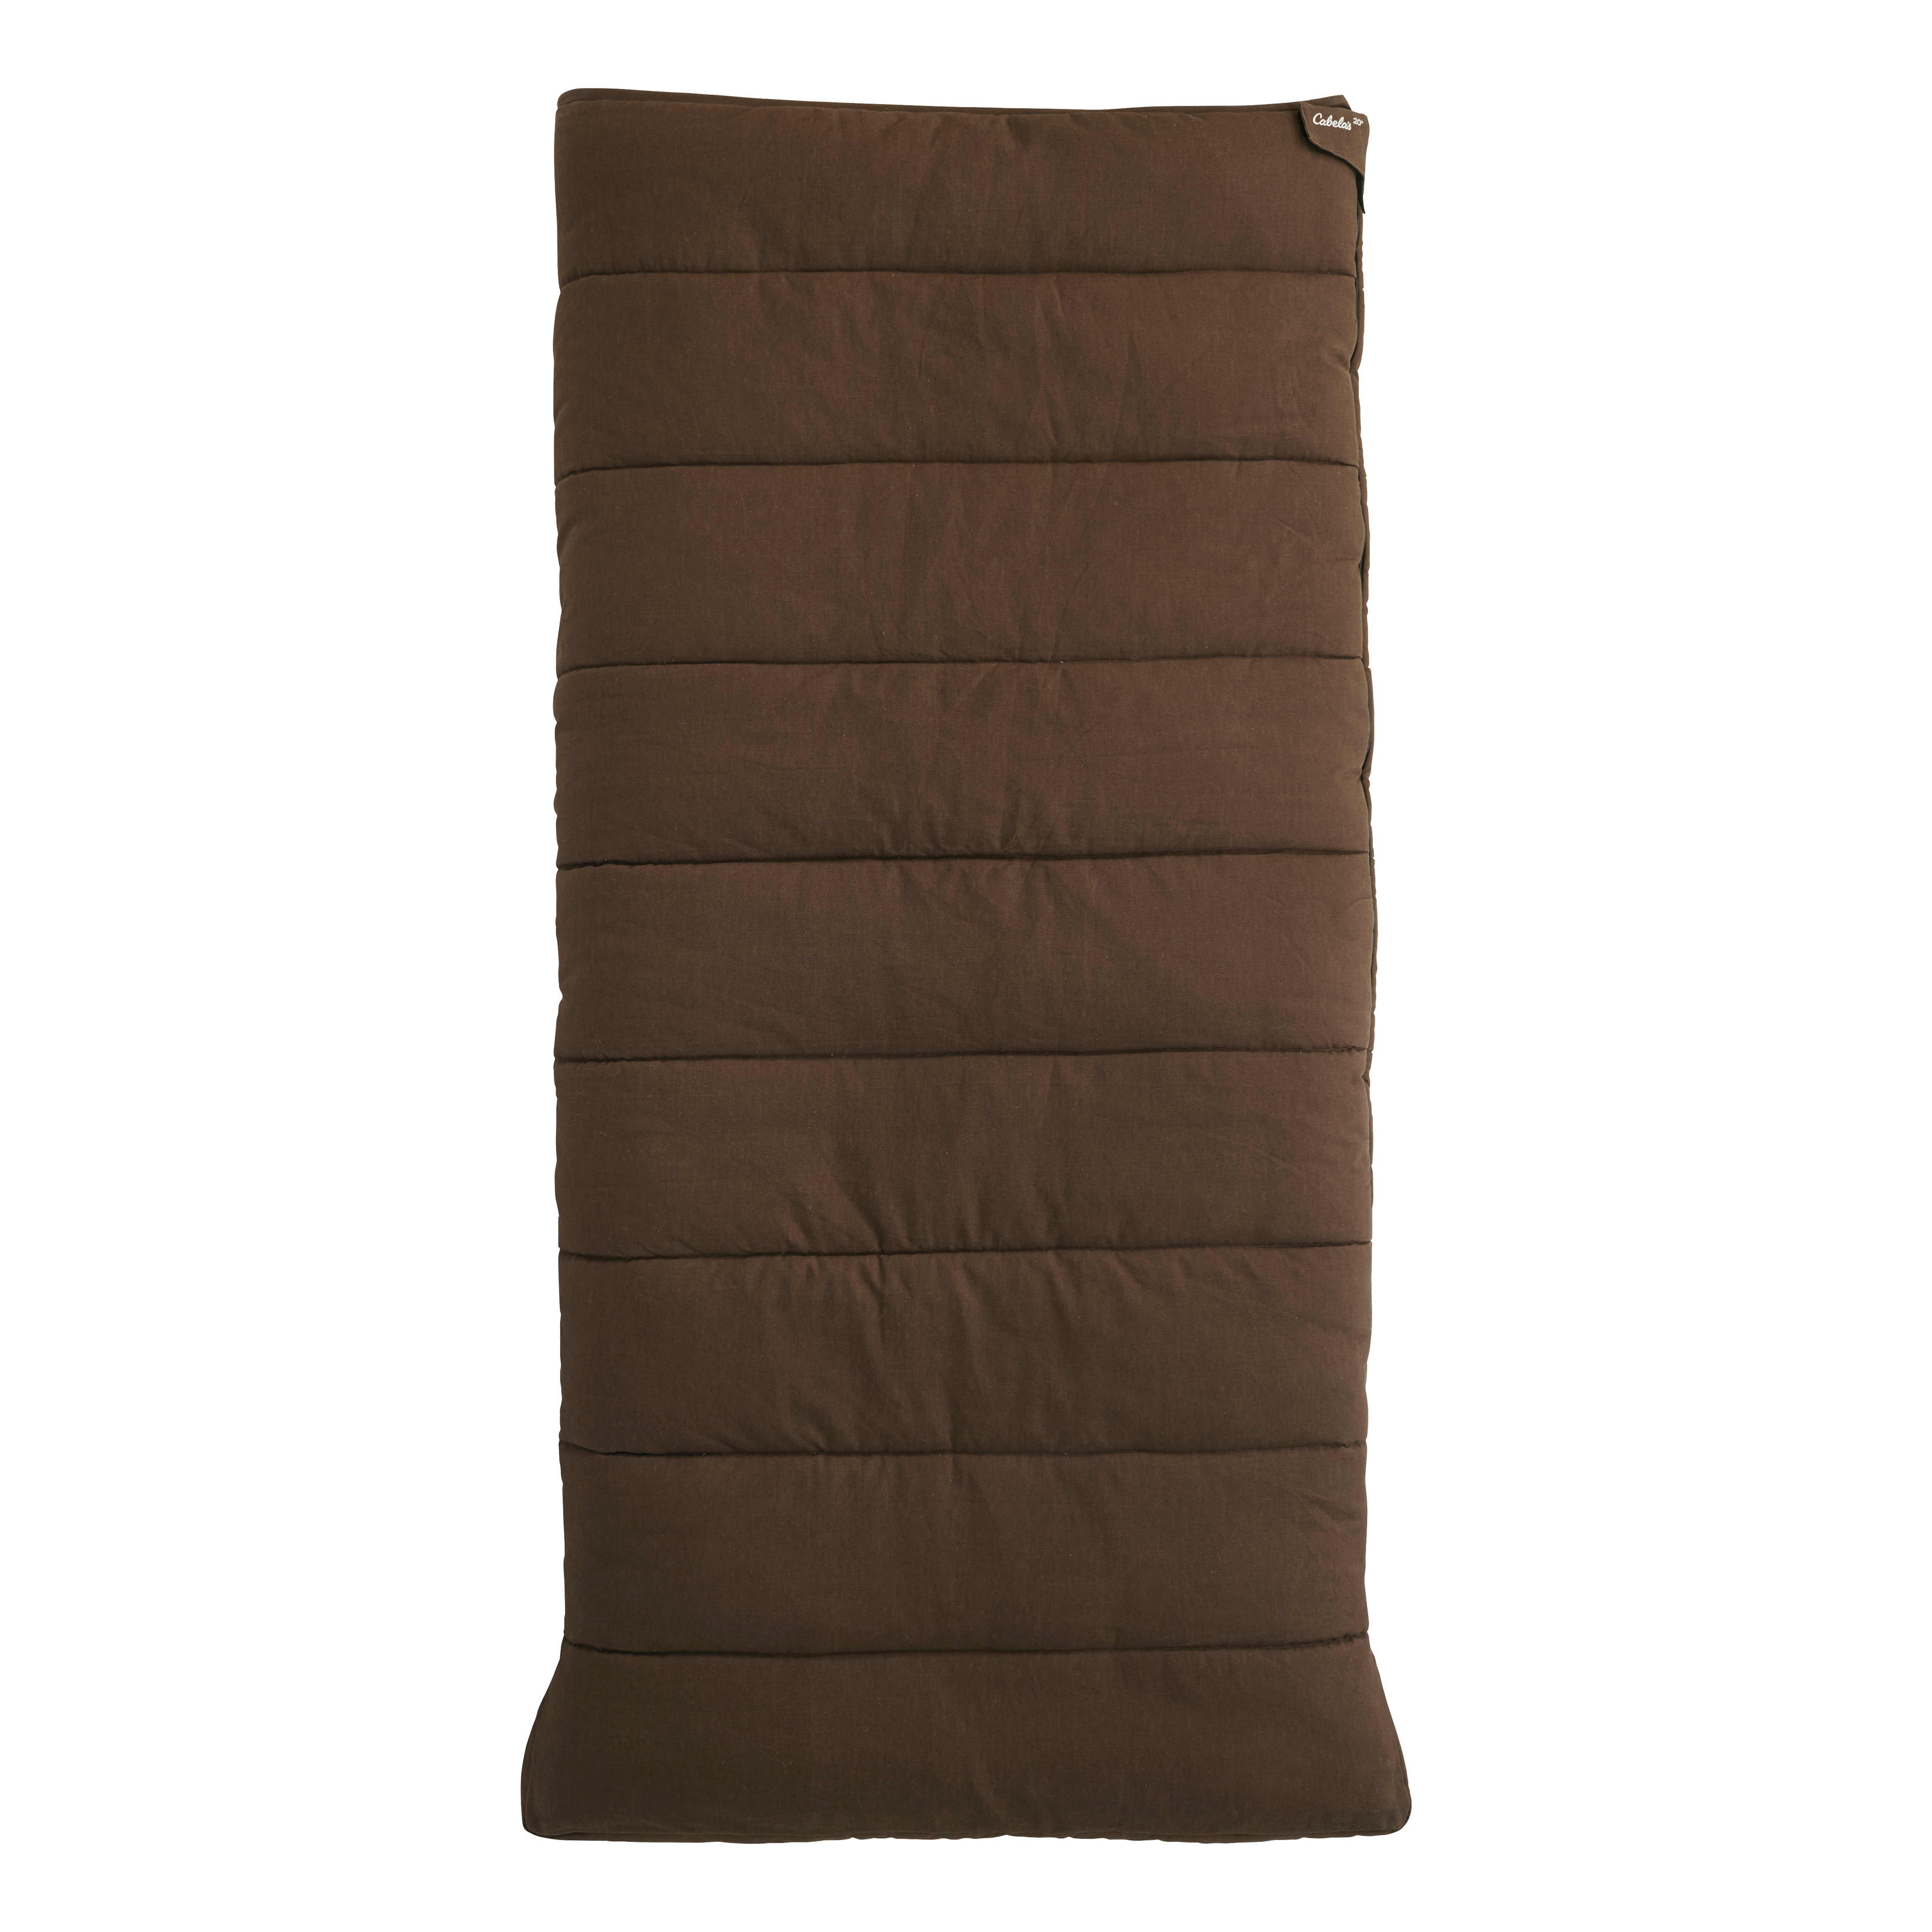 Cabela's Outfitter XL -6°C Sleeping Bag - Zipped Up View